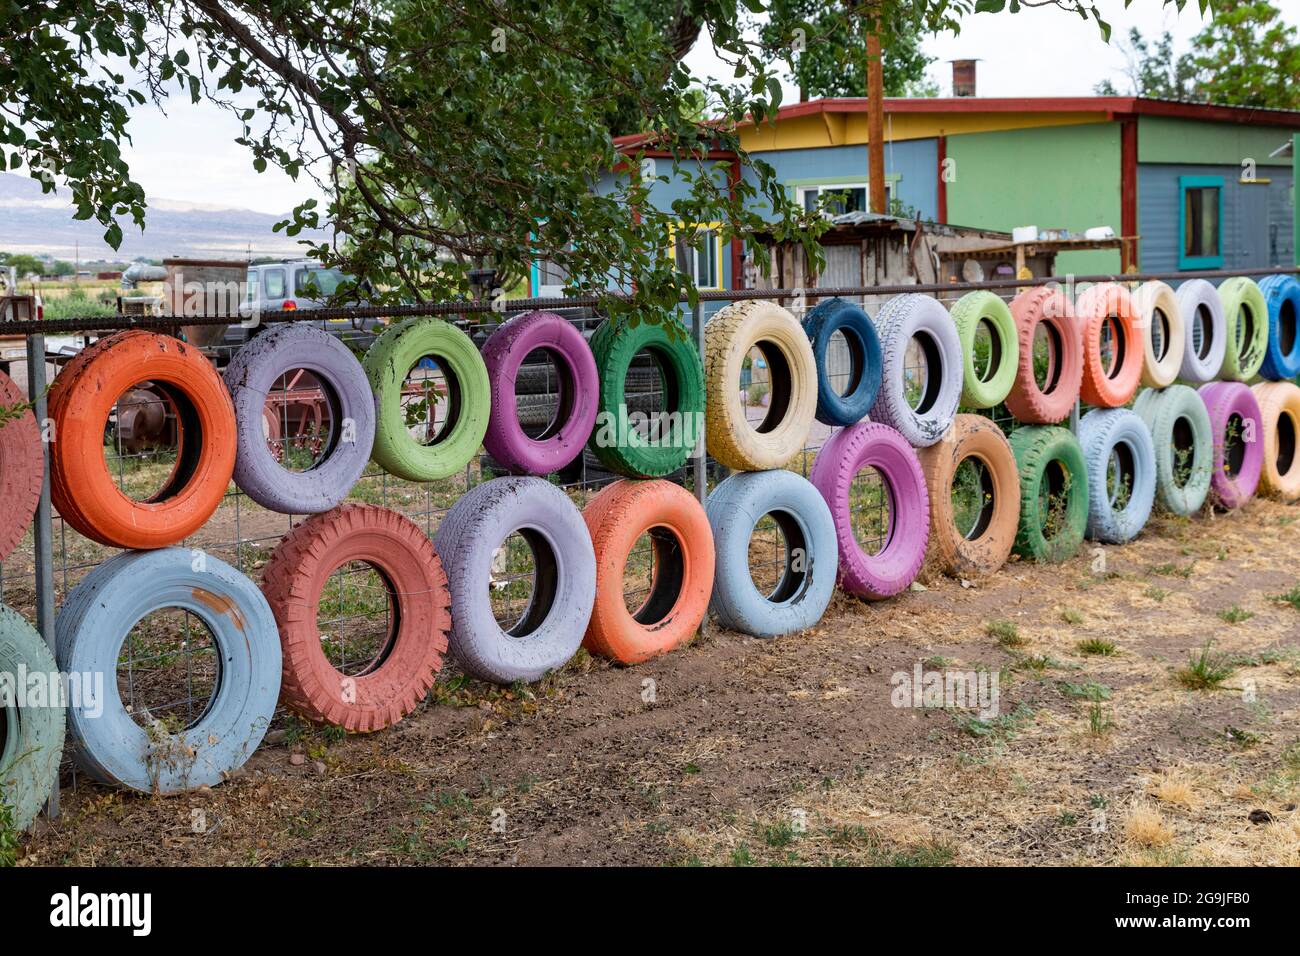 Escondida, New Mexico - Painted tires hung on a homeowner's fence in the New Mexico desert. Stock Photo